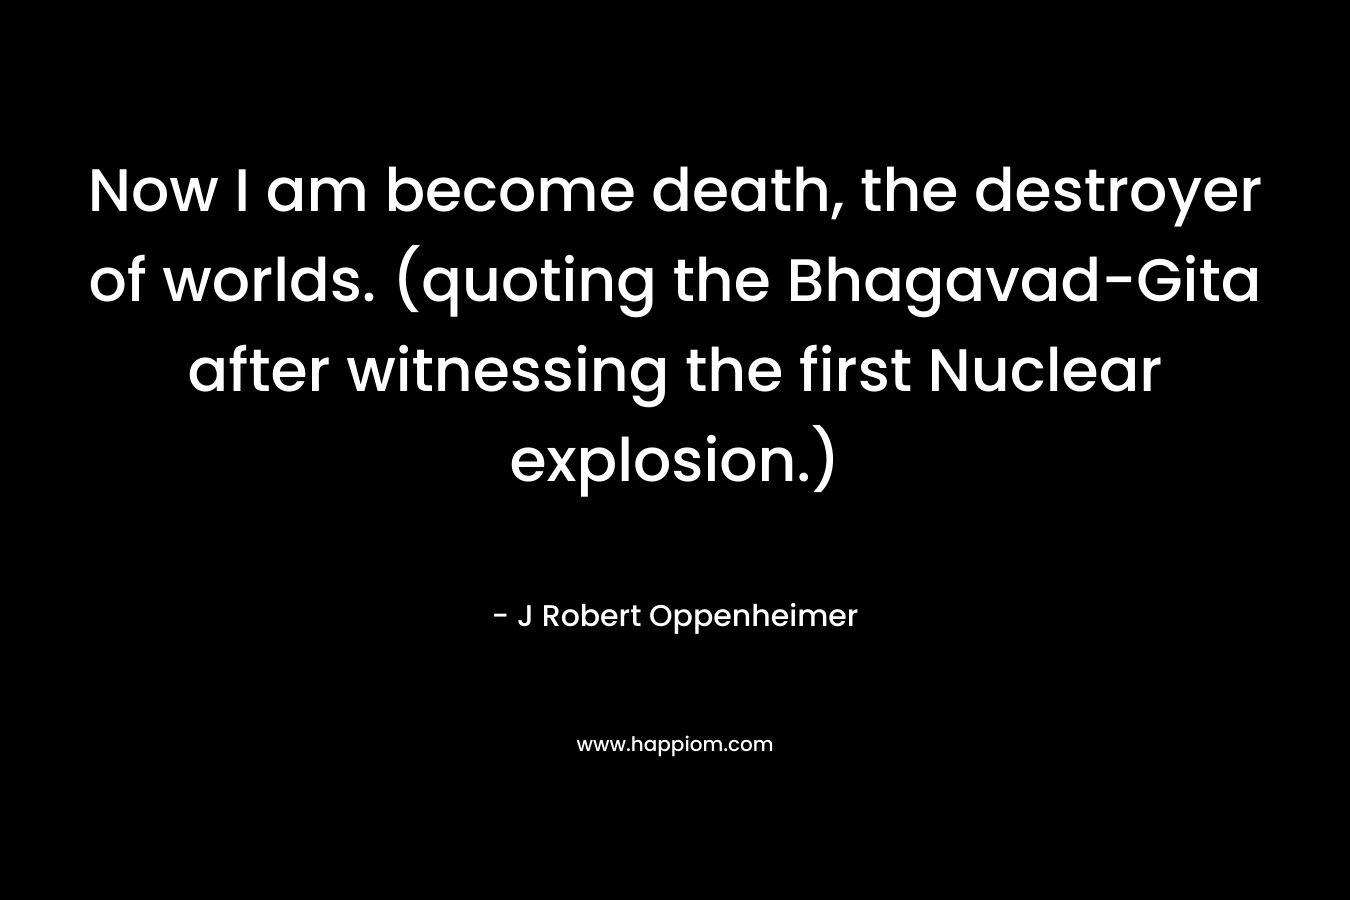 Now I am become death, the destroyer of worlds. (quoting the Bhagavad-Gita after witnessing the first Nuclear explosion.) – J Robert Oppenheimer